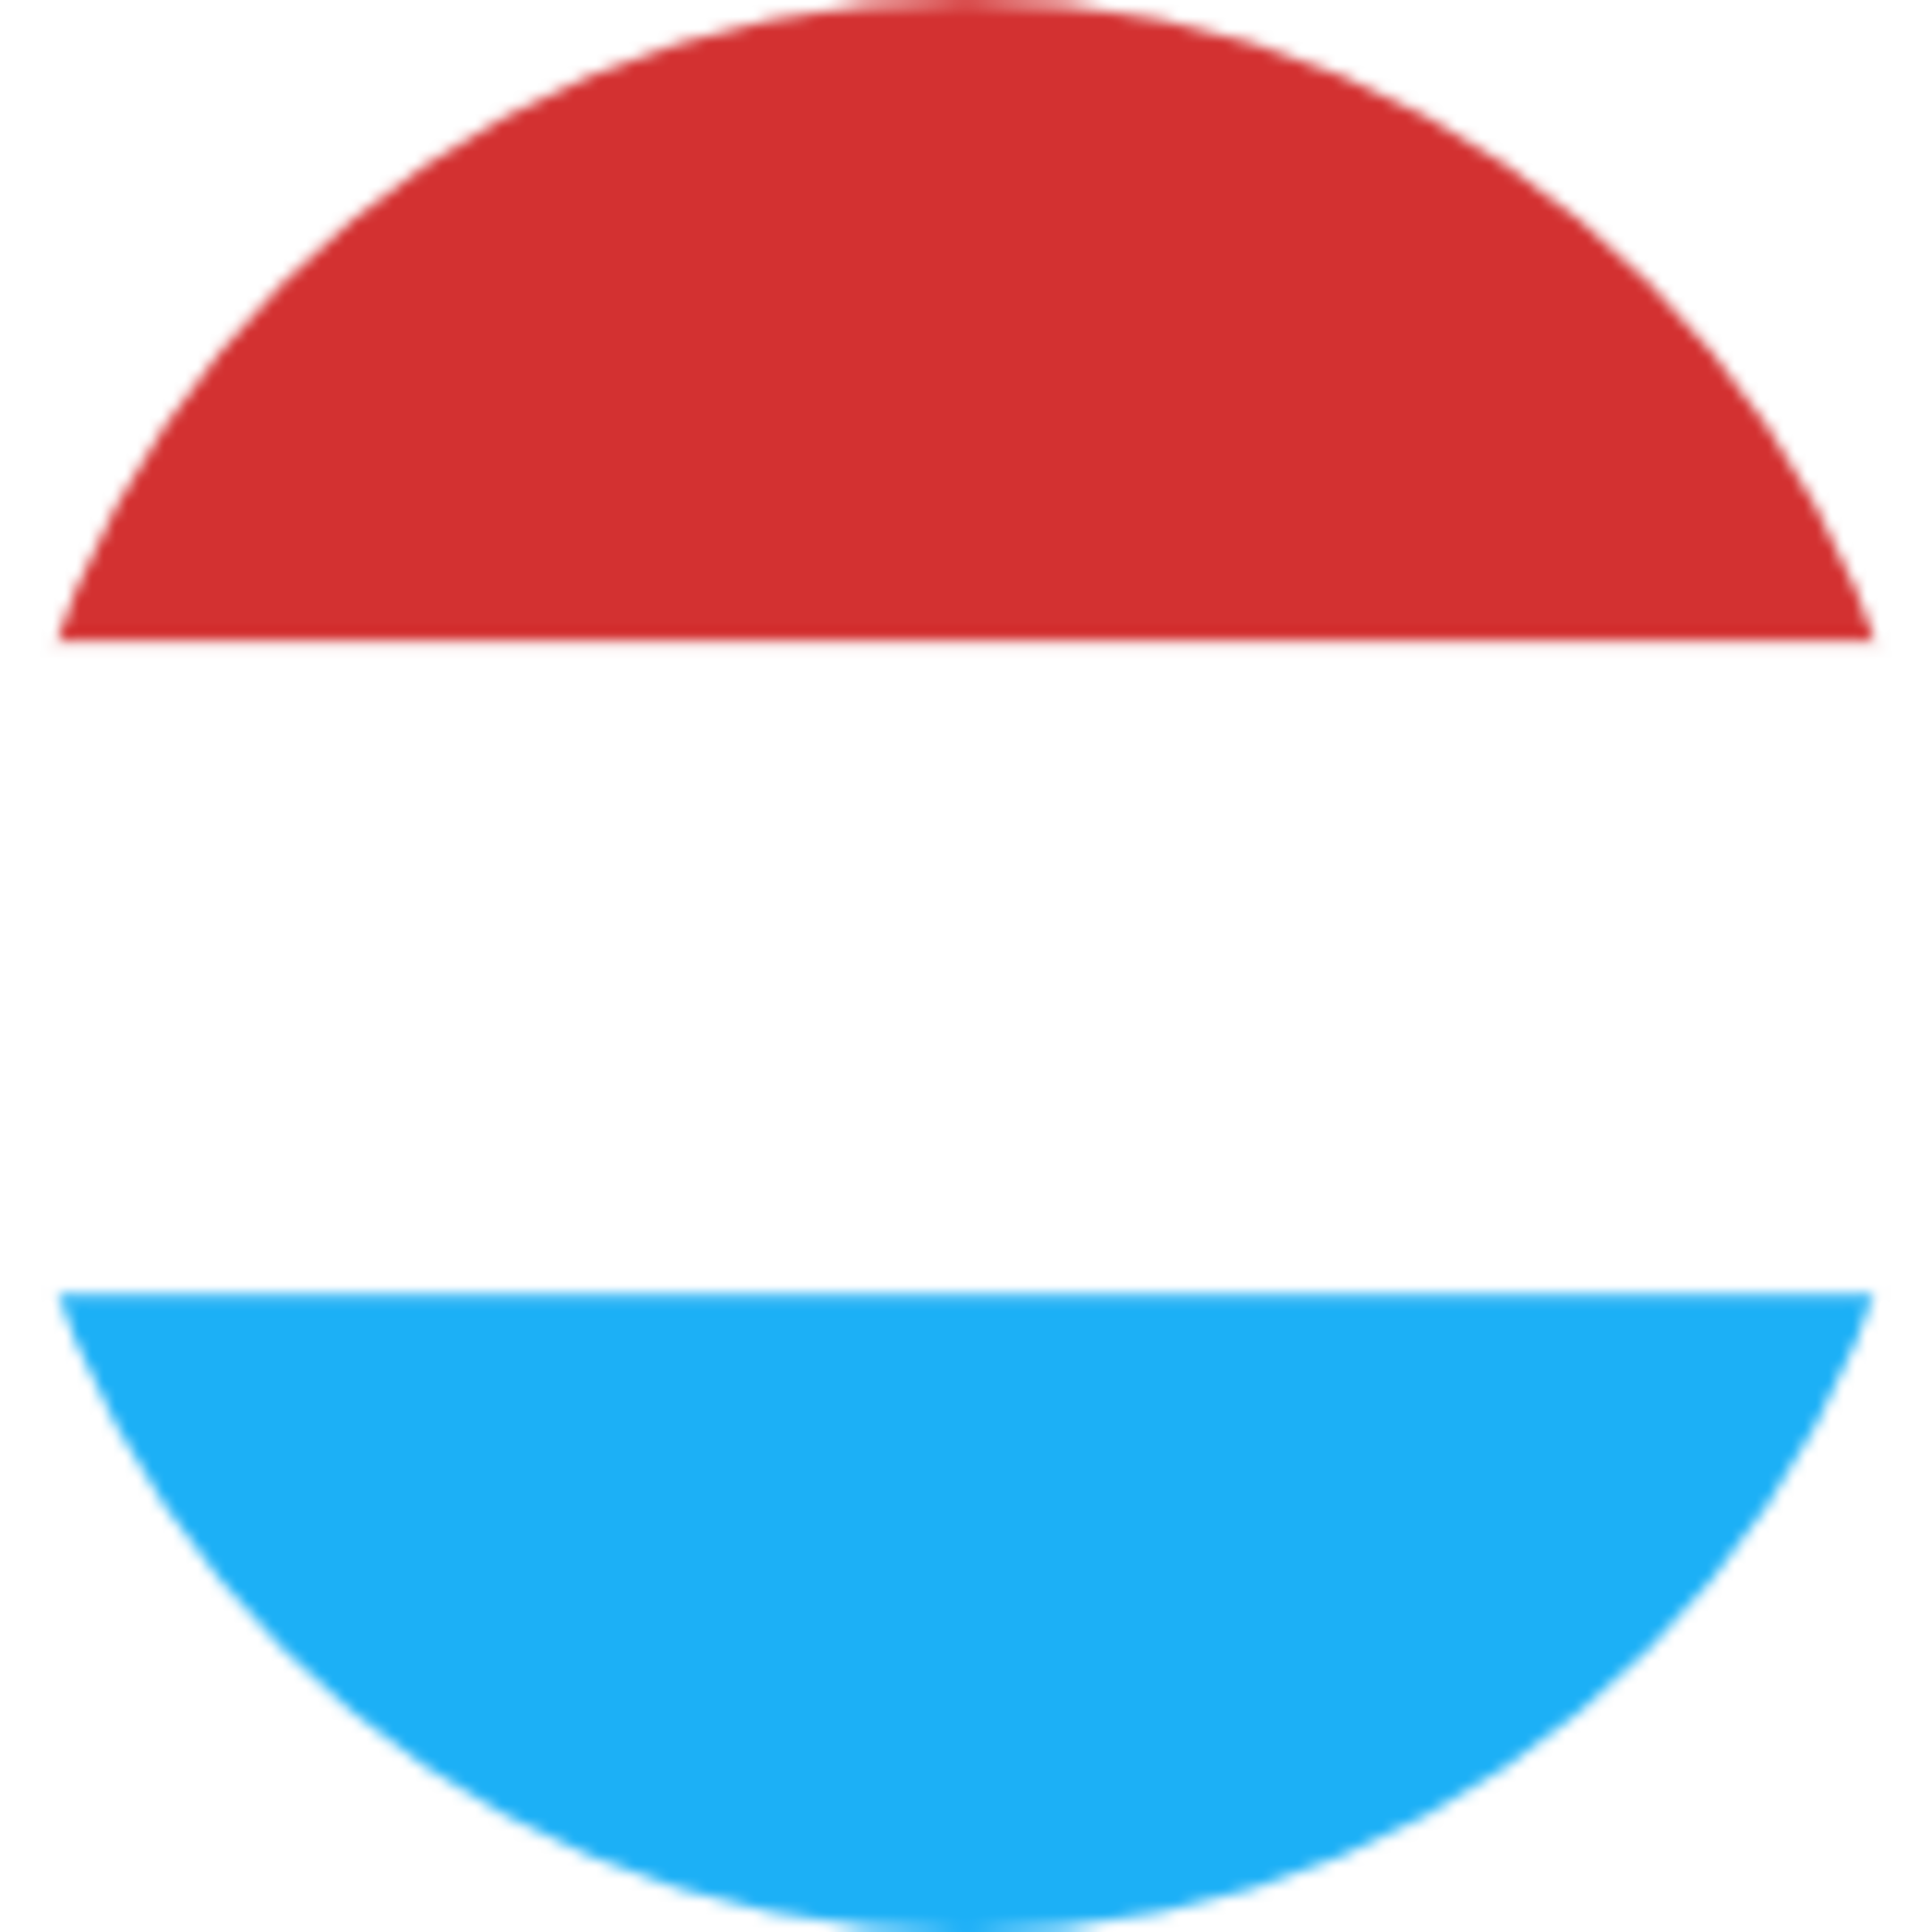 A Red White And Blue Circle With A White Stripe